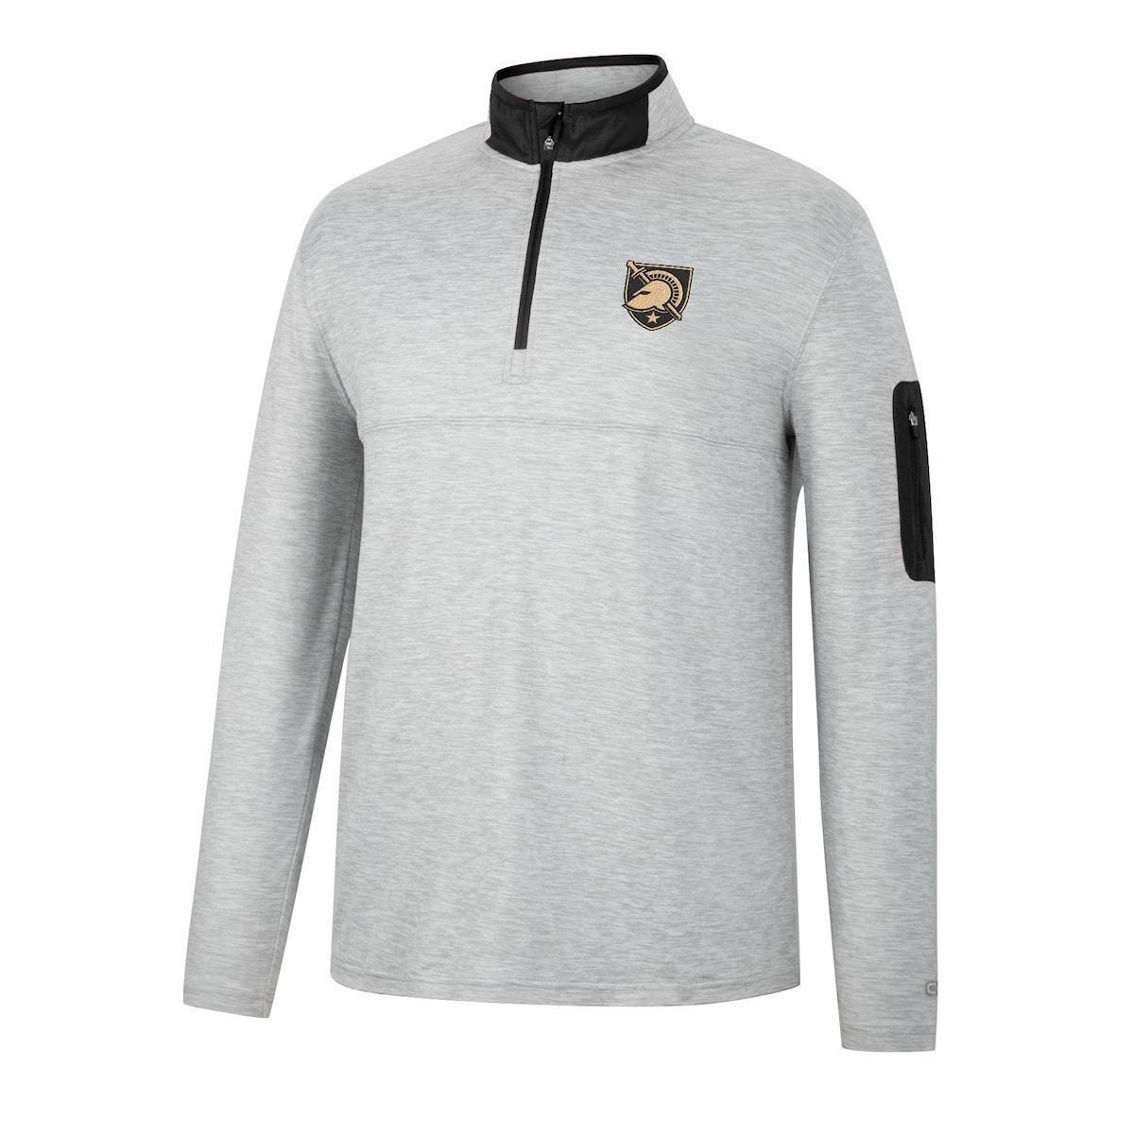 Colosseum Men's Heathered Gray/Black Army Black Knights Country Club Windshirt Quarter-Zip Jacket - Image 3 of 4